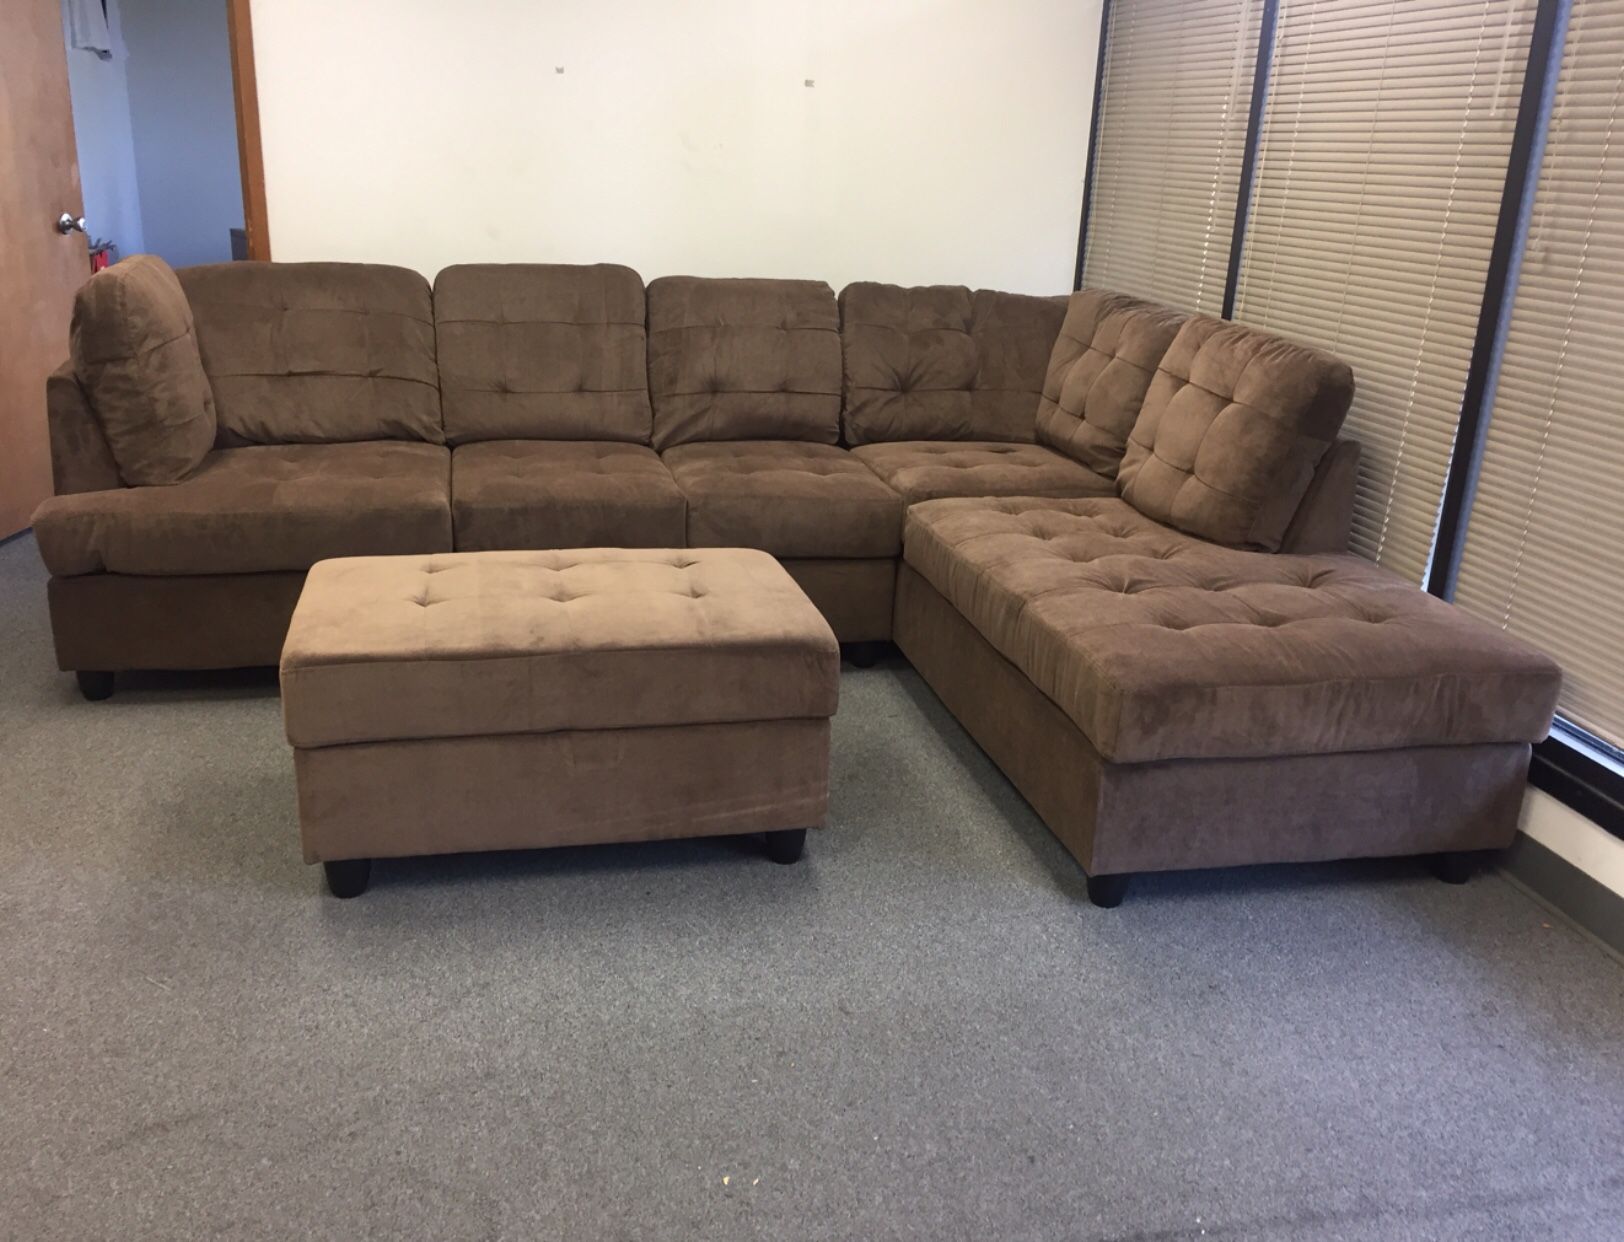 Brand New Brown Chenille Sectional Couch With Storage Ottoman And Pillows. Can Deliver Today!